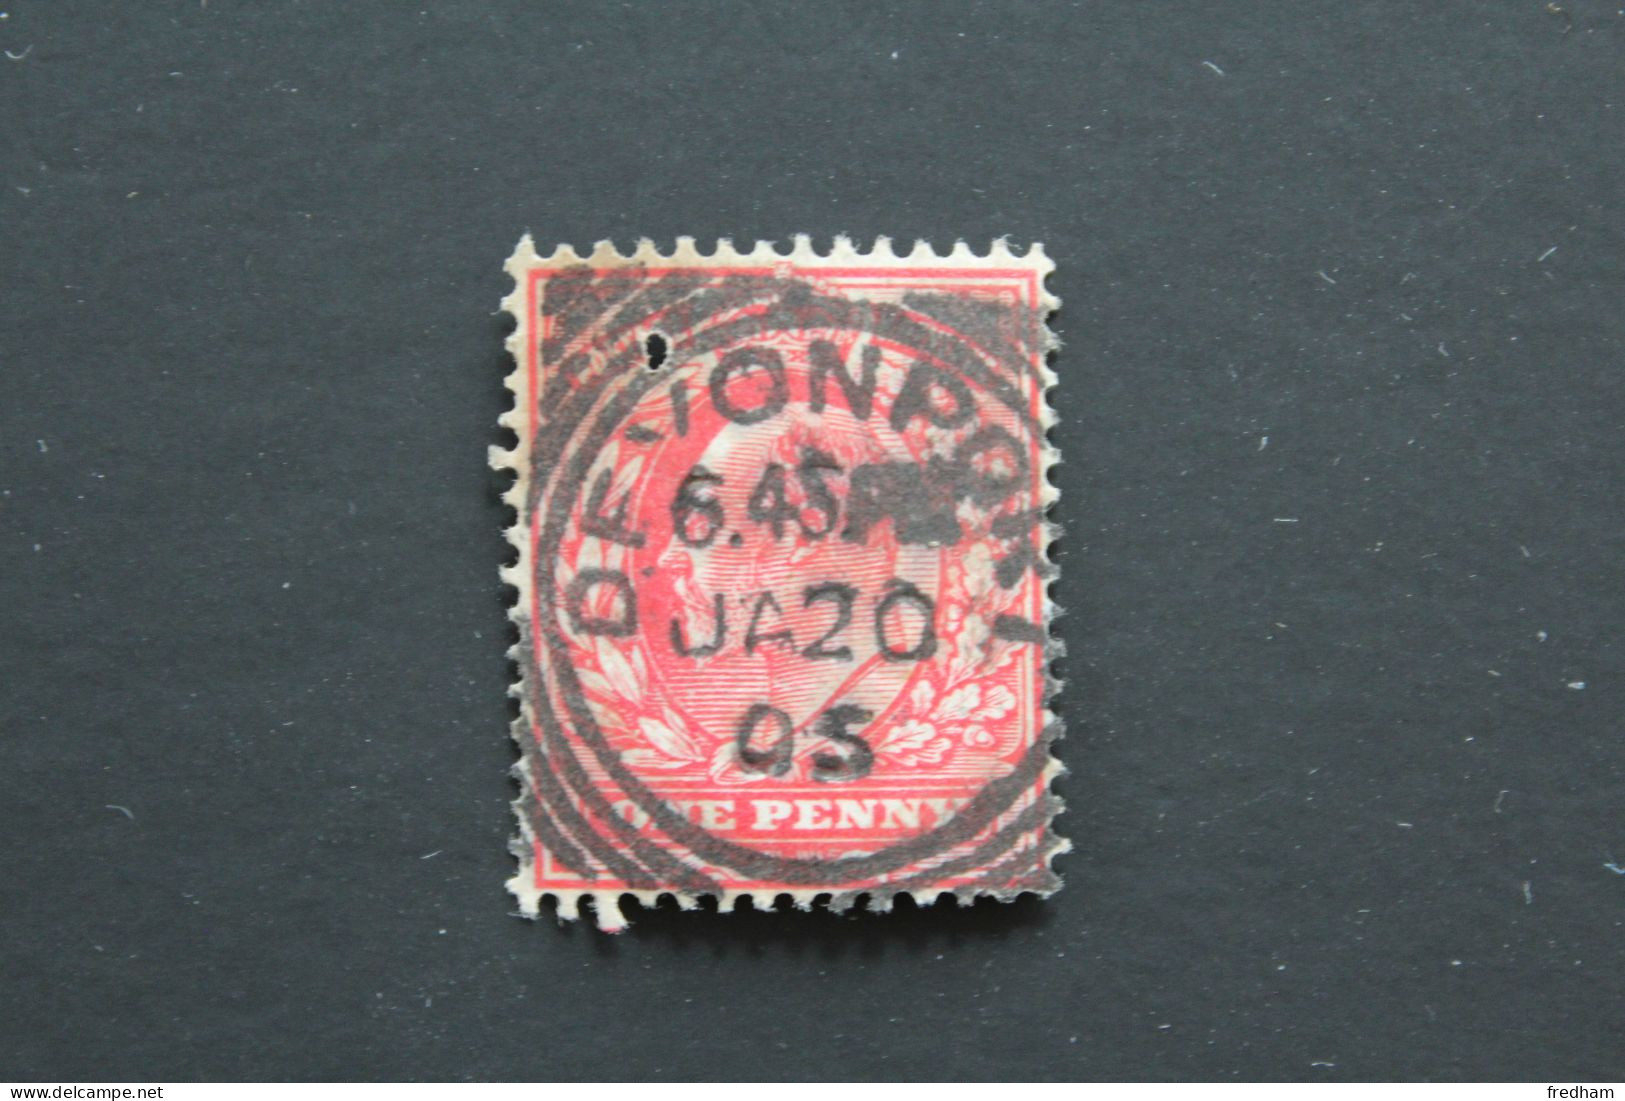 1902 Y&T NO GB 107 EDWARD VII ONE PENNY ROUGE ECARLATE  CACHET A DATE DEVONPORT( EX PLYMOUTH DOCK) DU 20 JAN 1905 .. - Used Stamps